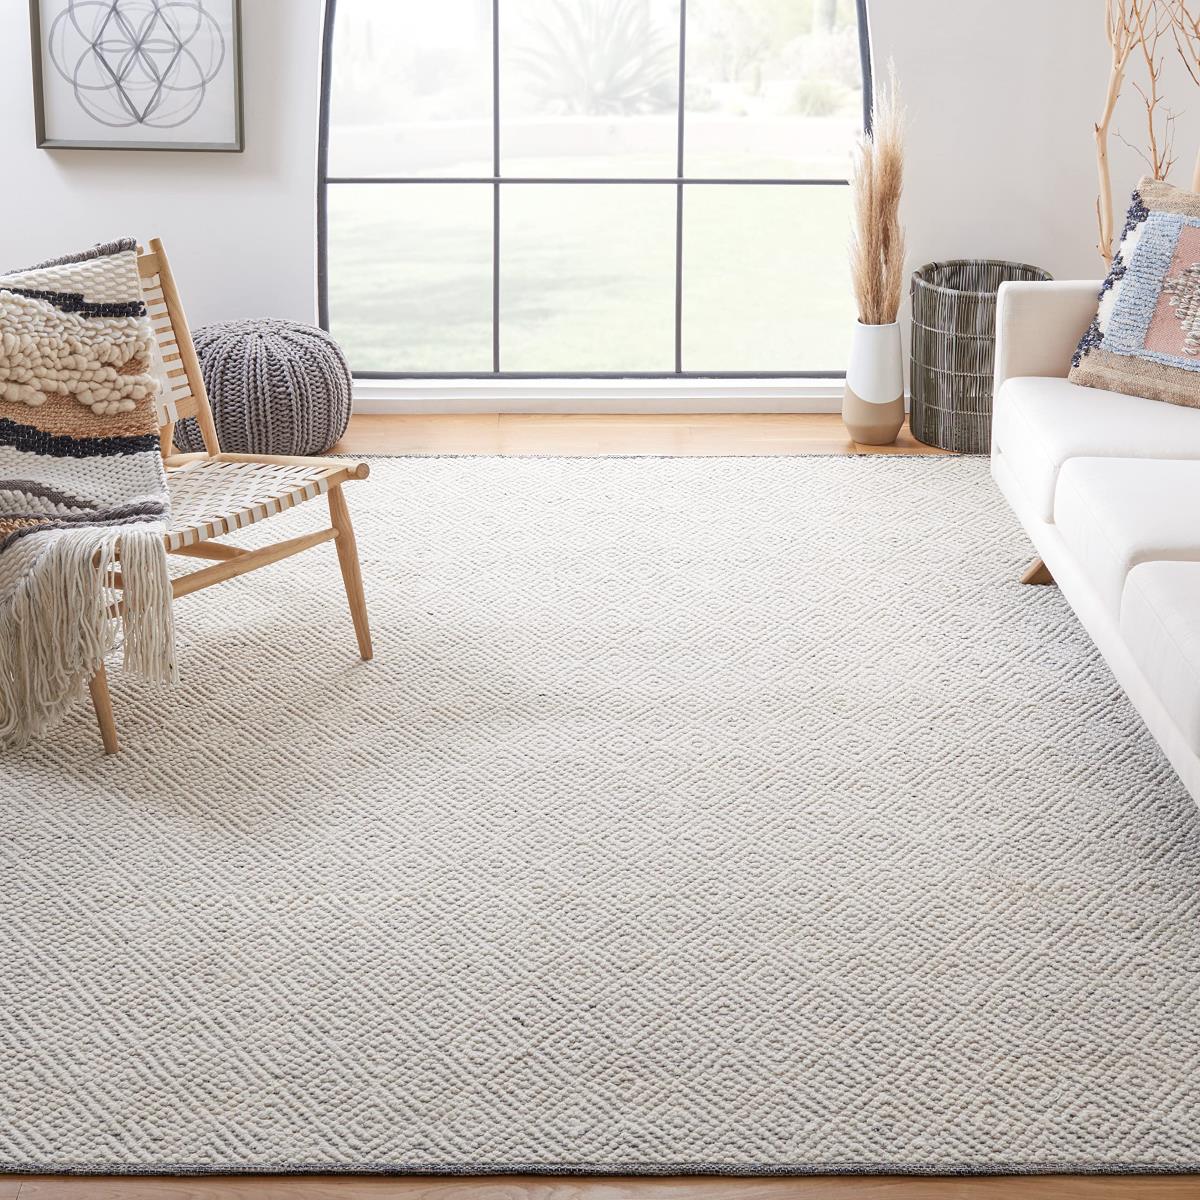 How To Build 9×12 Area Rugs